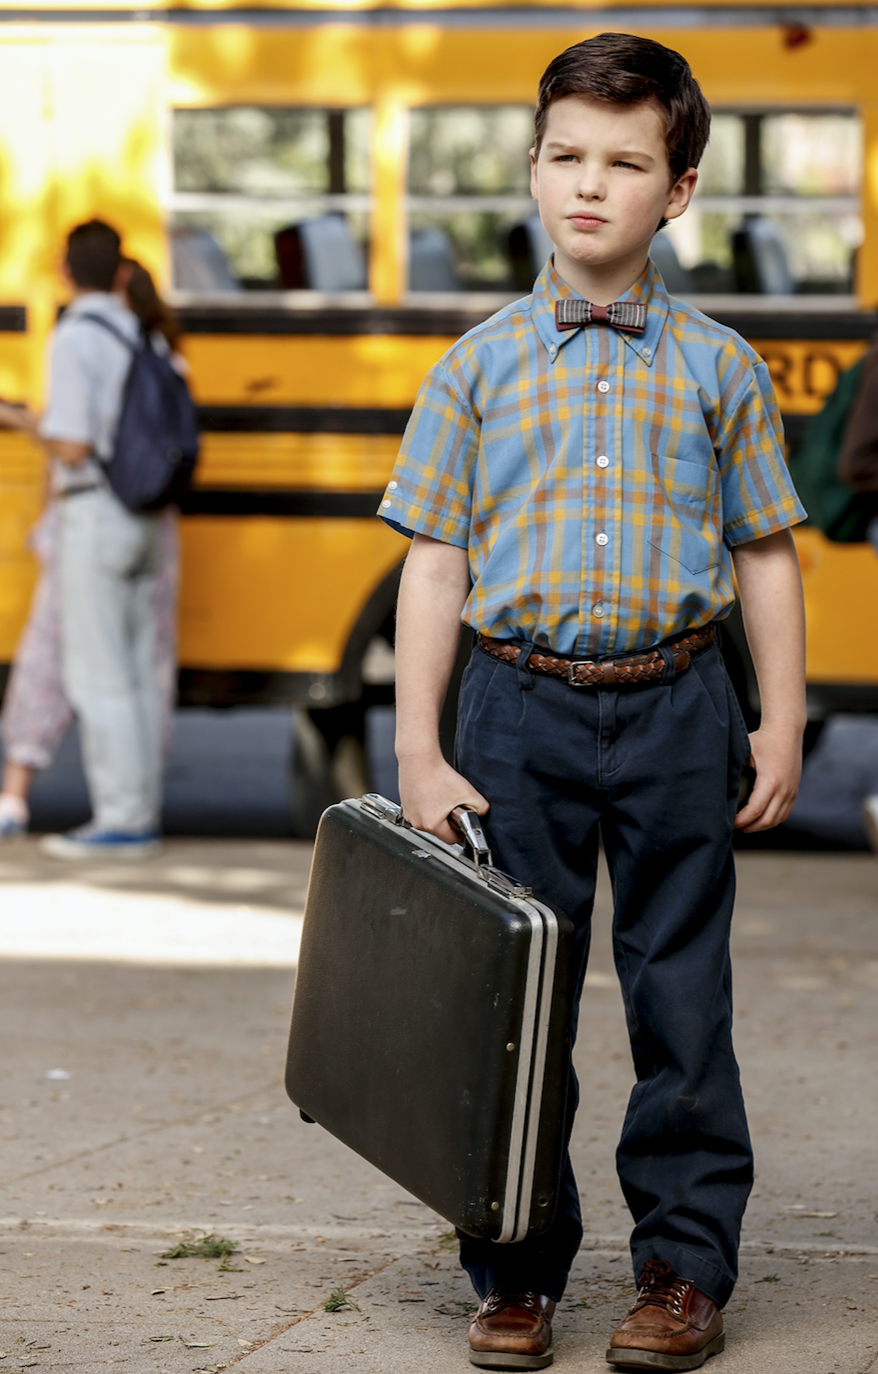 Young Sheldon finale dropped a huge bombshell about grownup Sheldon's